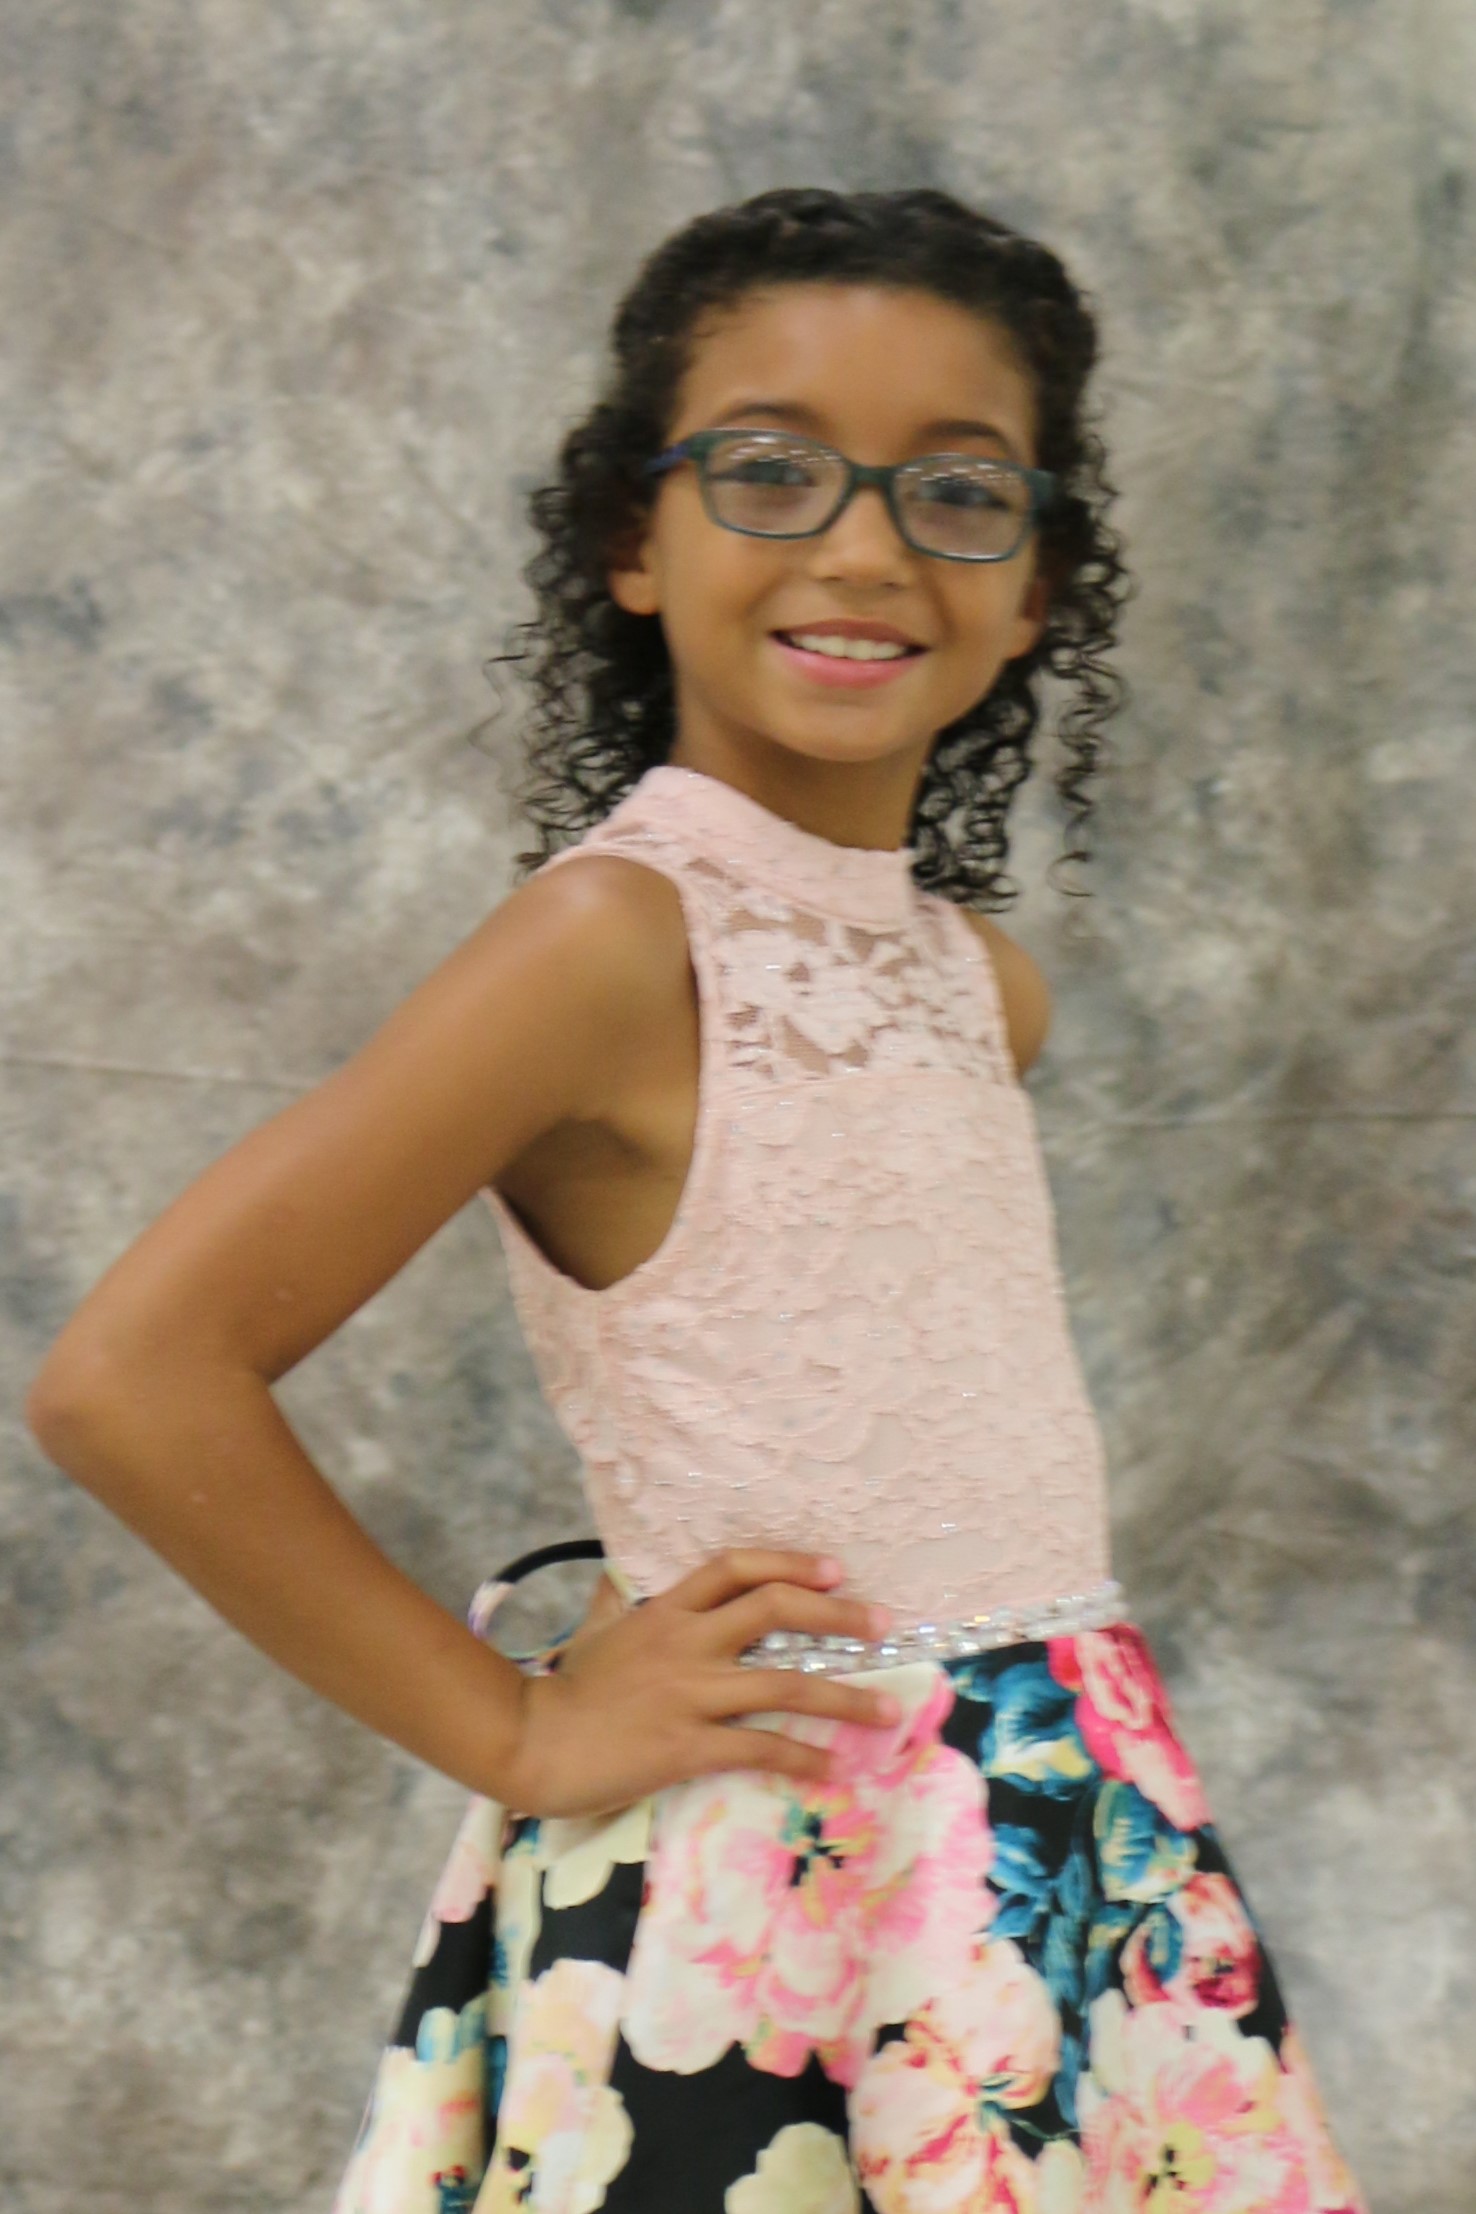 Little Miss 5-7 Contestant - Hadleigh Crawford 7